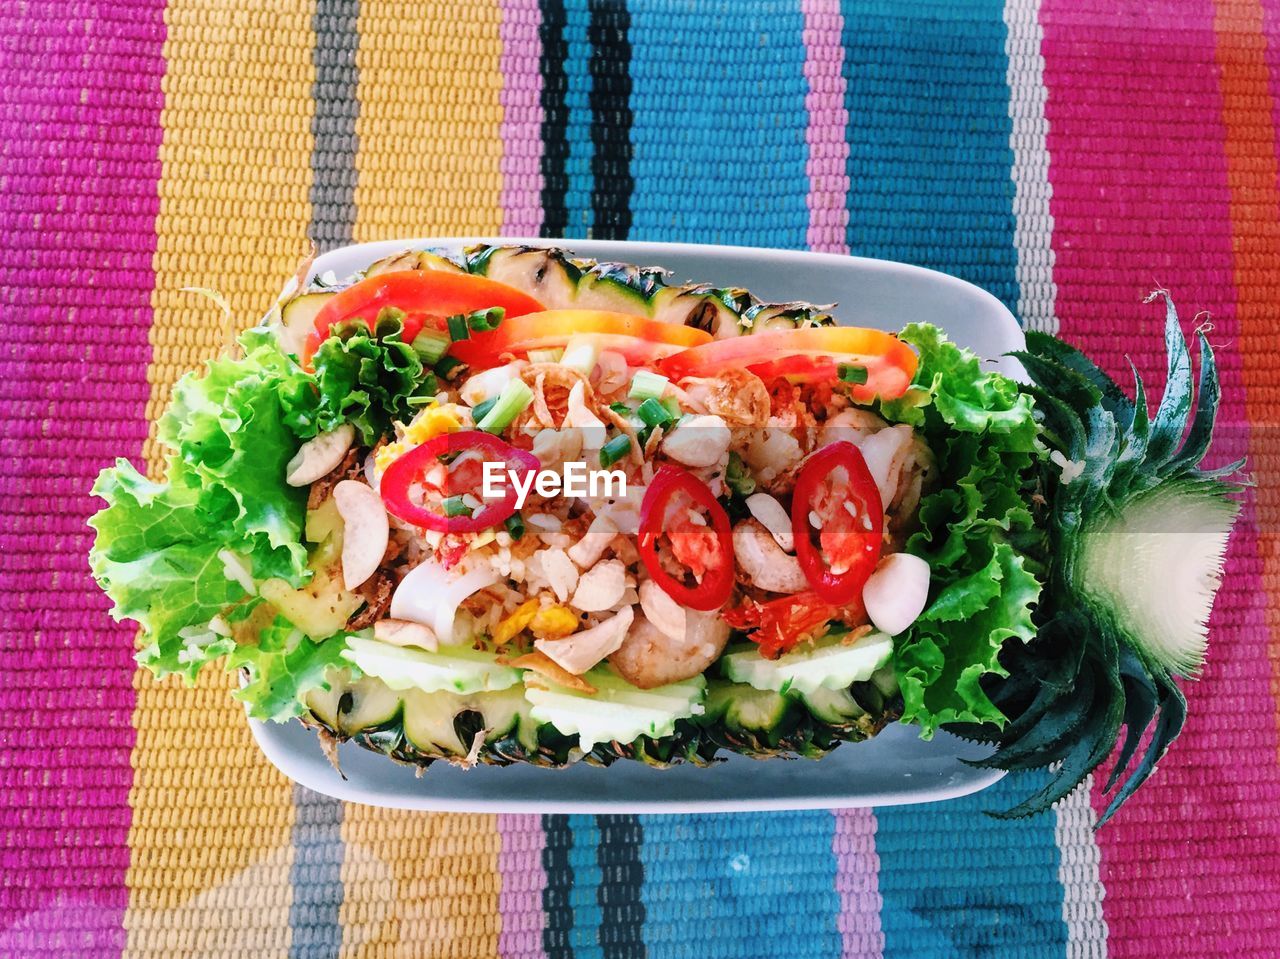 Directly above shot of food served in bowl on colorful tablecloth